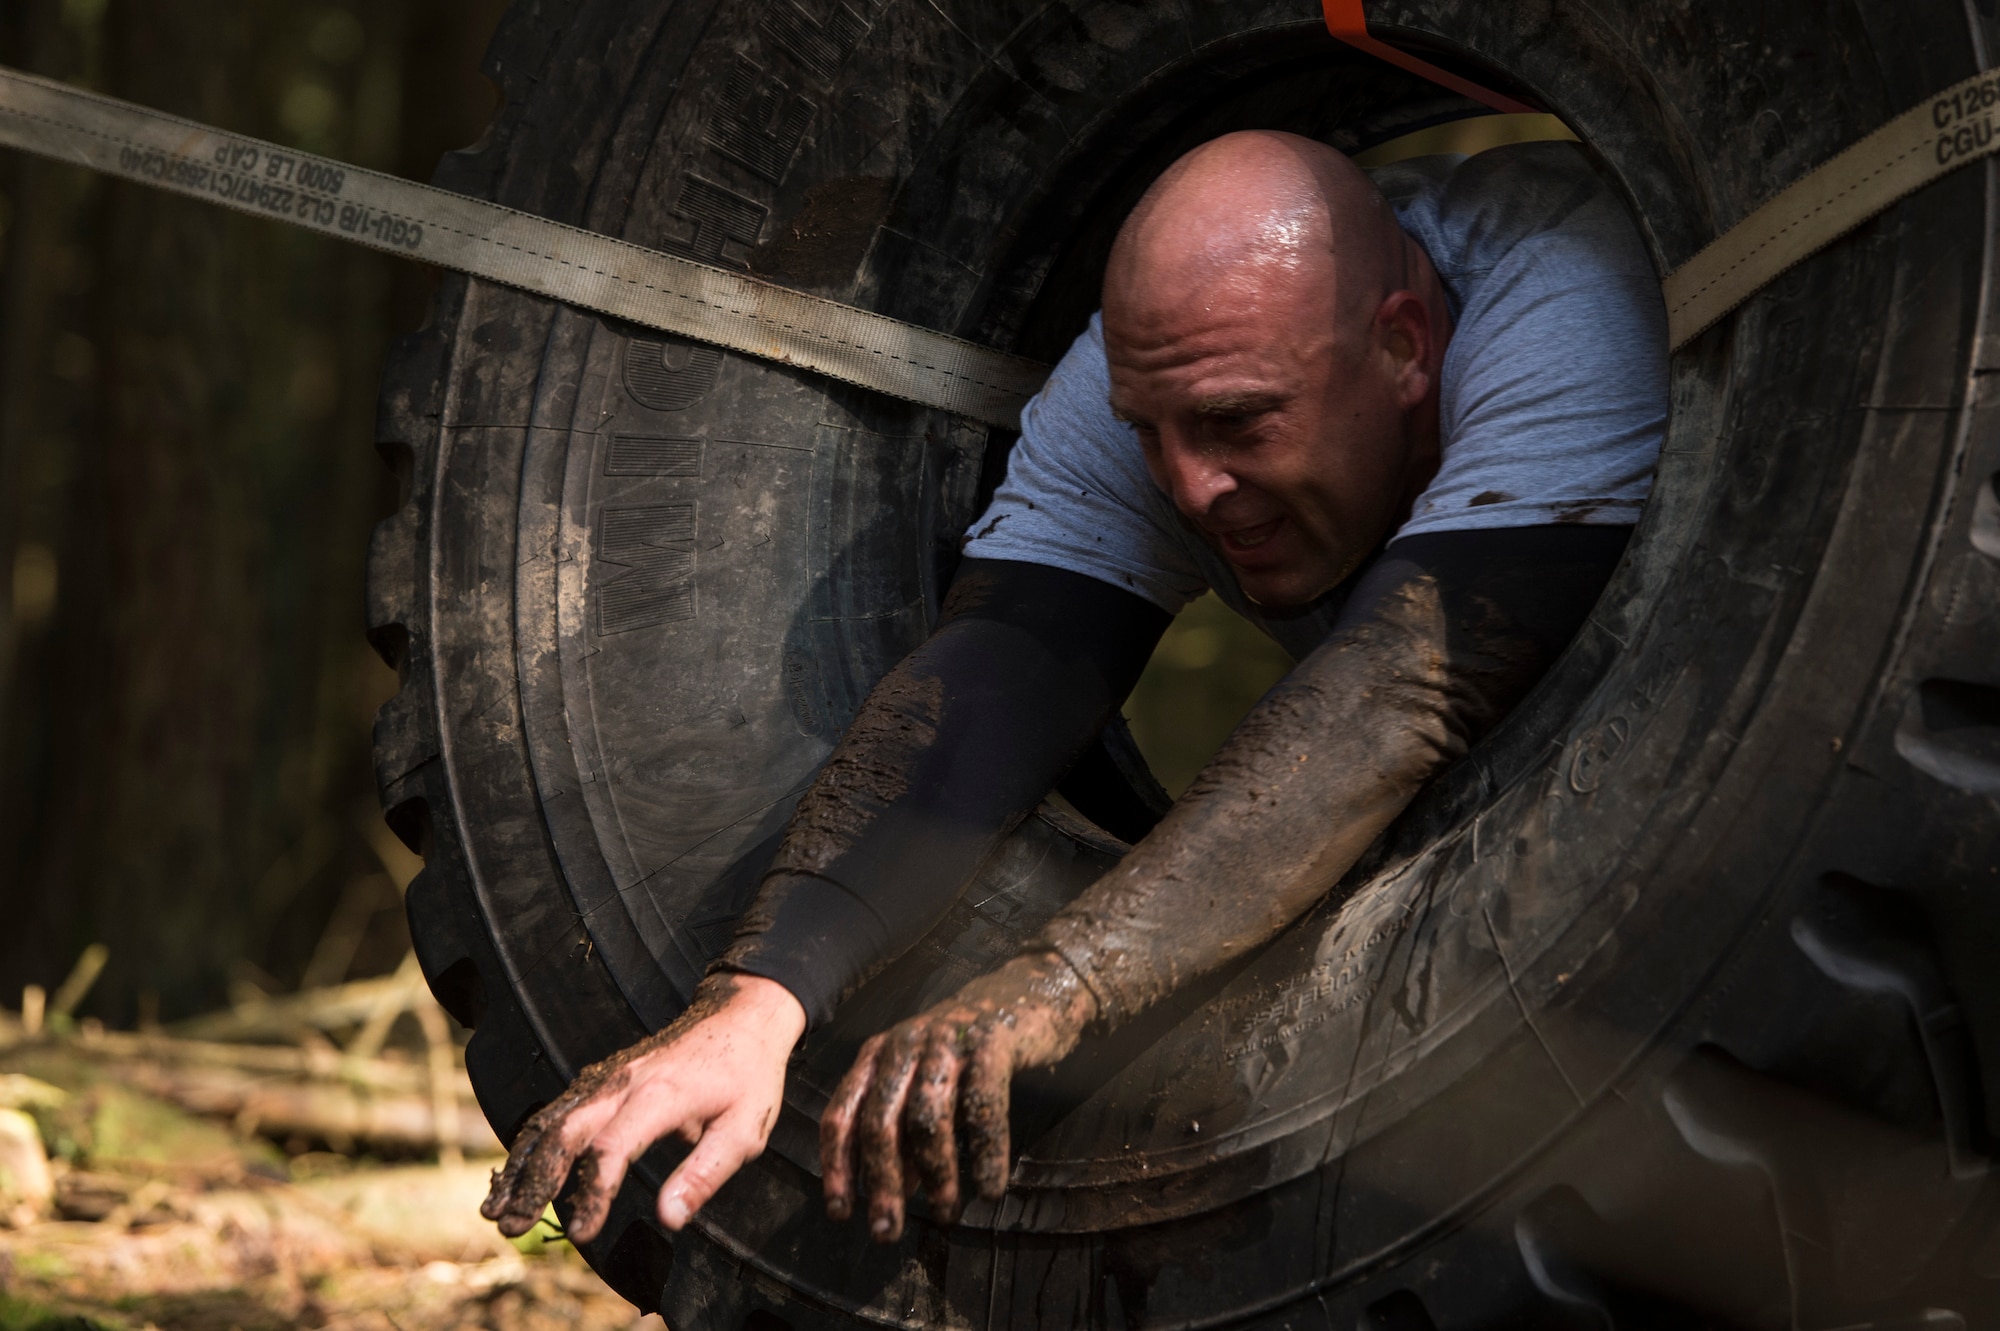 Senior Master Sgt. Jason Theriault, 52nd Civil Engineer Squadron deputy fire chief, climbs through a tire during the second annual Tier II 5K Mud Run Aug. 20, 2014, at Spangdahlem Air Base, Germany. All the proceeds from the event went to the Fisher House in Landstuhl. (U.S. Air Force photo by Staff Sgt. Christopher Ruano/Released)